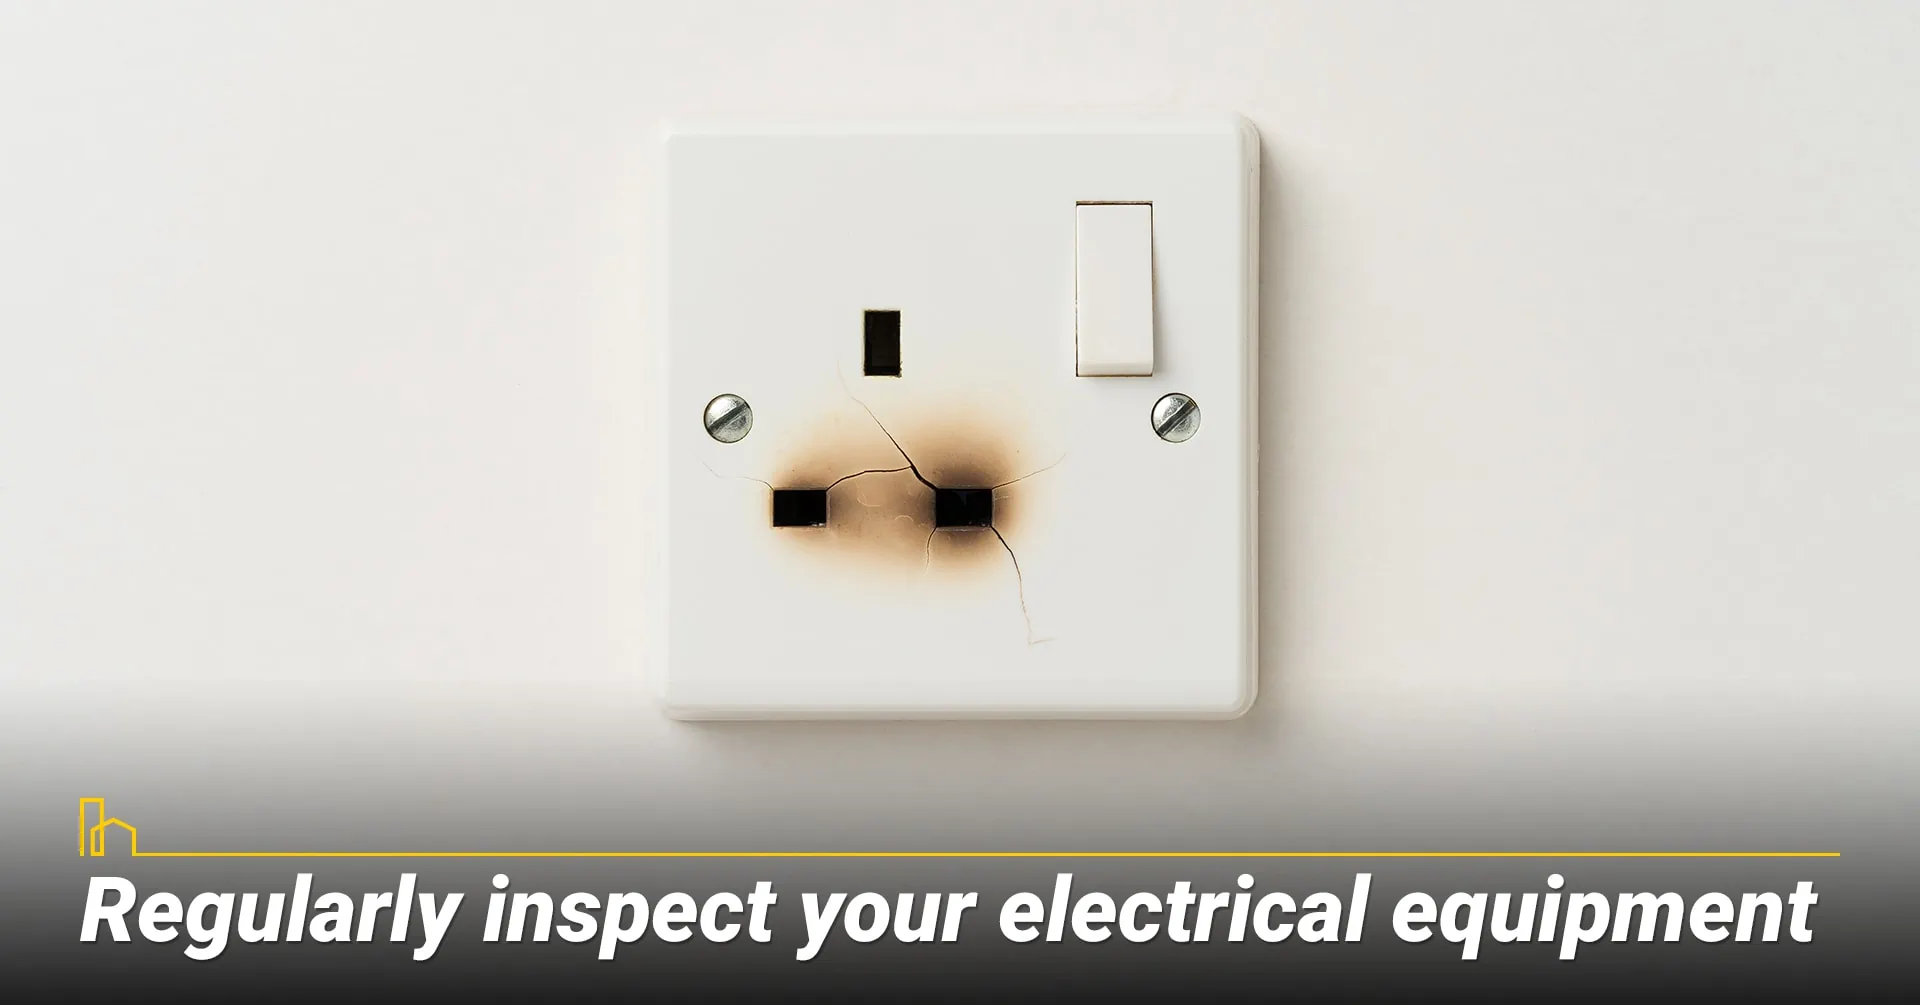 Regularly inspect your electrical equipment.